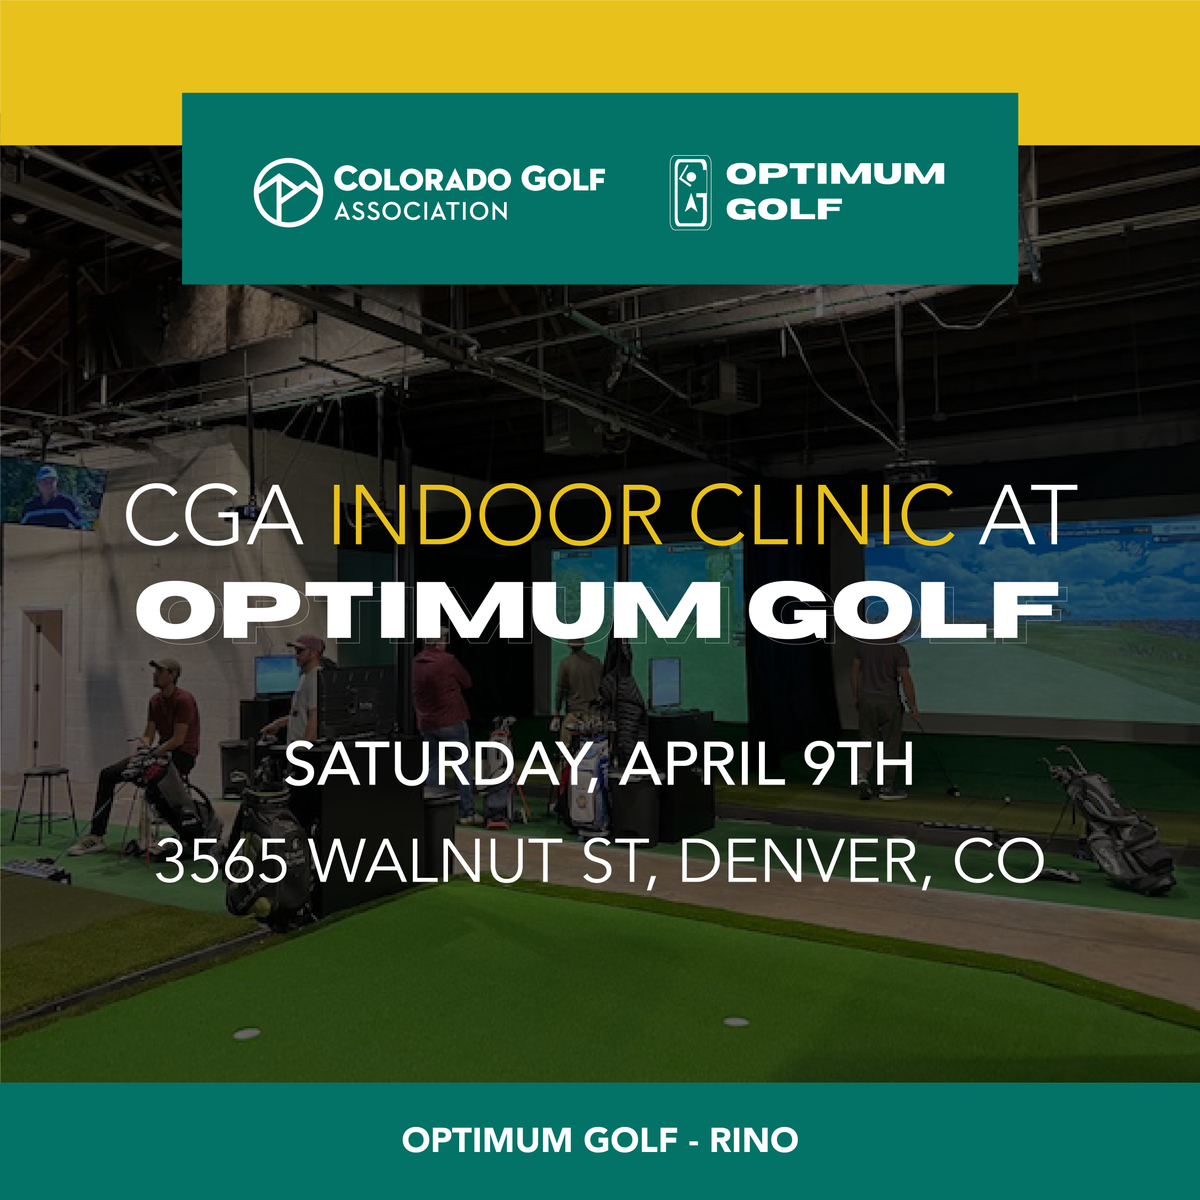 There are limited spots left for the CGA Optimum Clinic on Saturday April, 9th! Get up to two hours of bay time with instruction from one of Optimum Golf's certified coaches. Use this opportunity to get the golf season started on a high note! Click the link in our bio to sign up! https://t.co/c9etTuu1ta